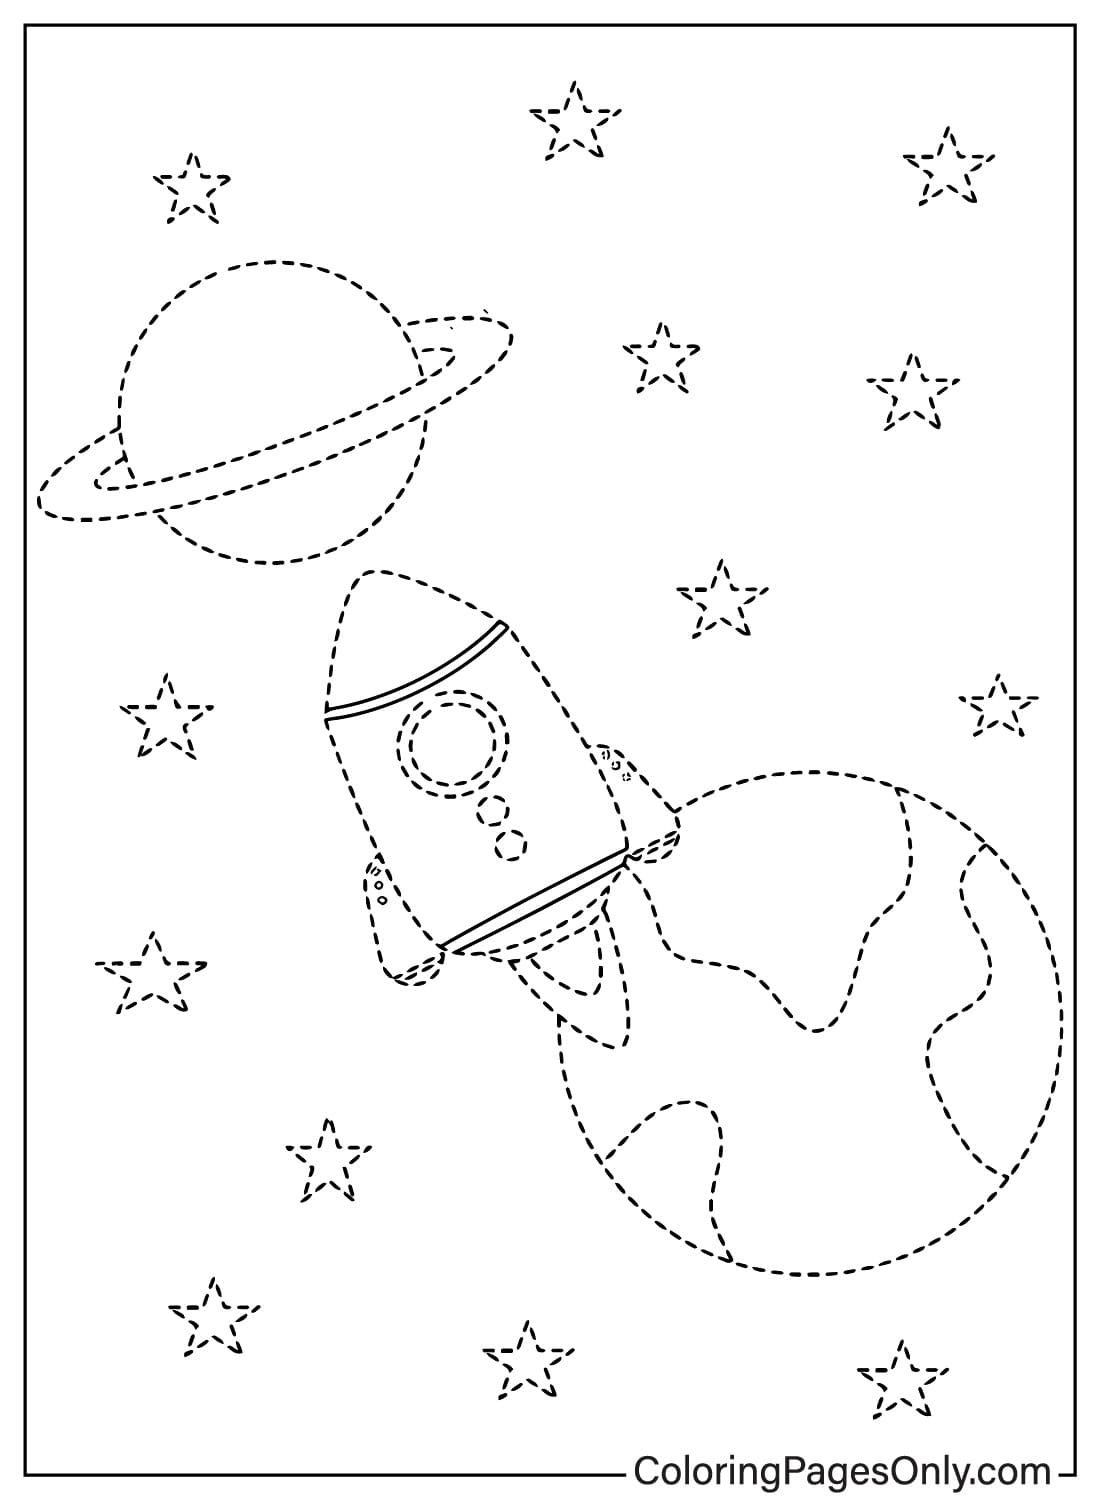 Coloring Page Tracing from Tracing